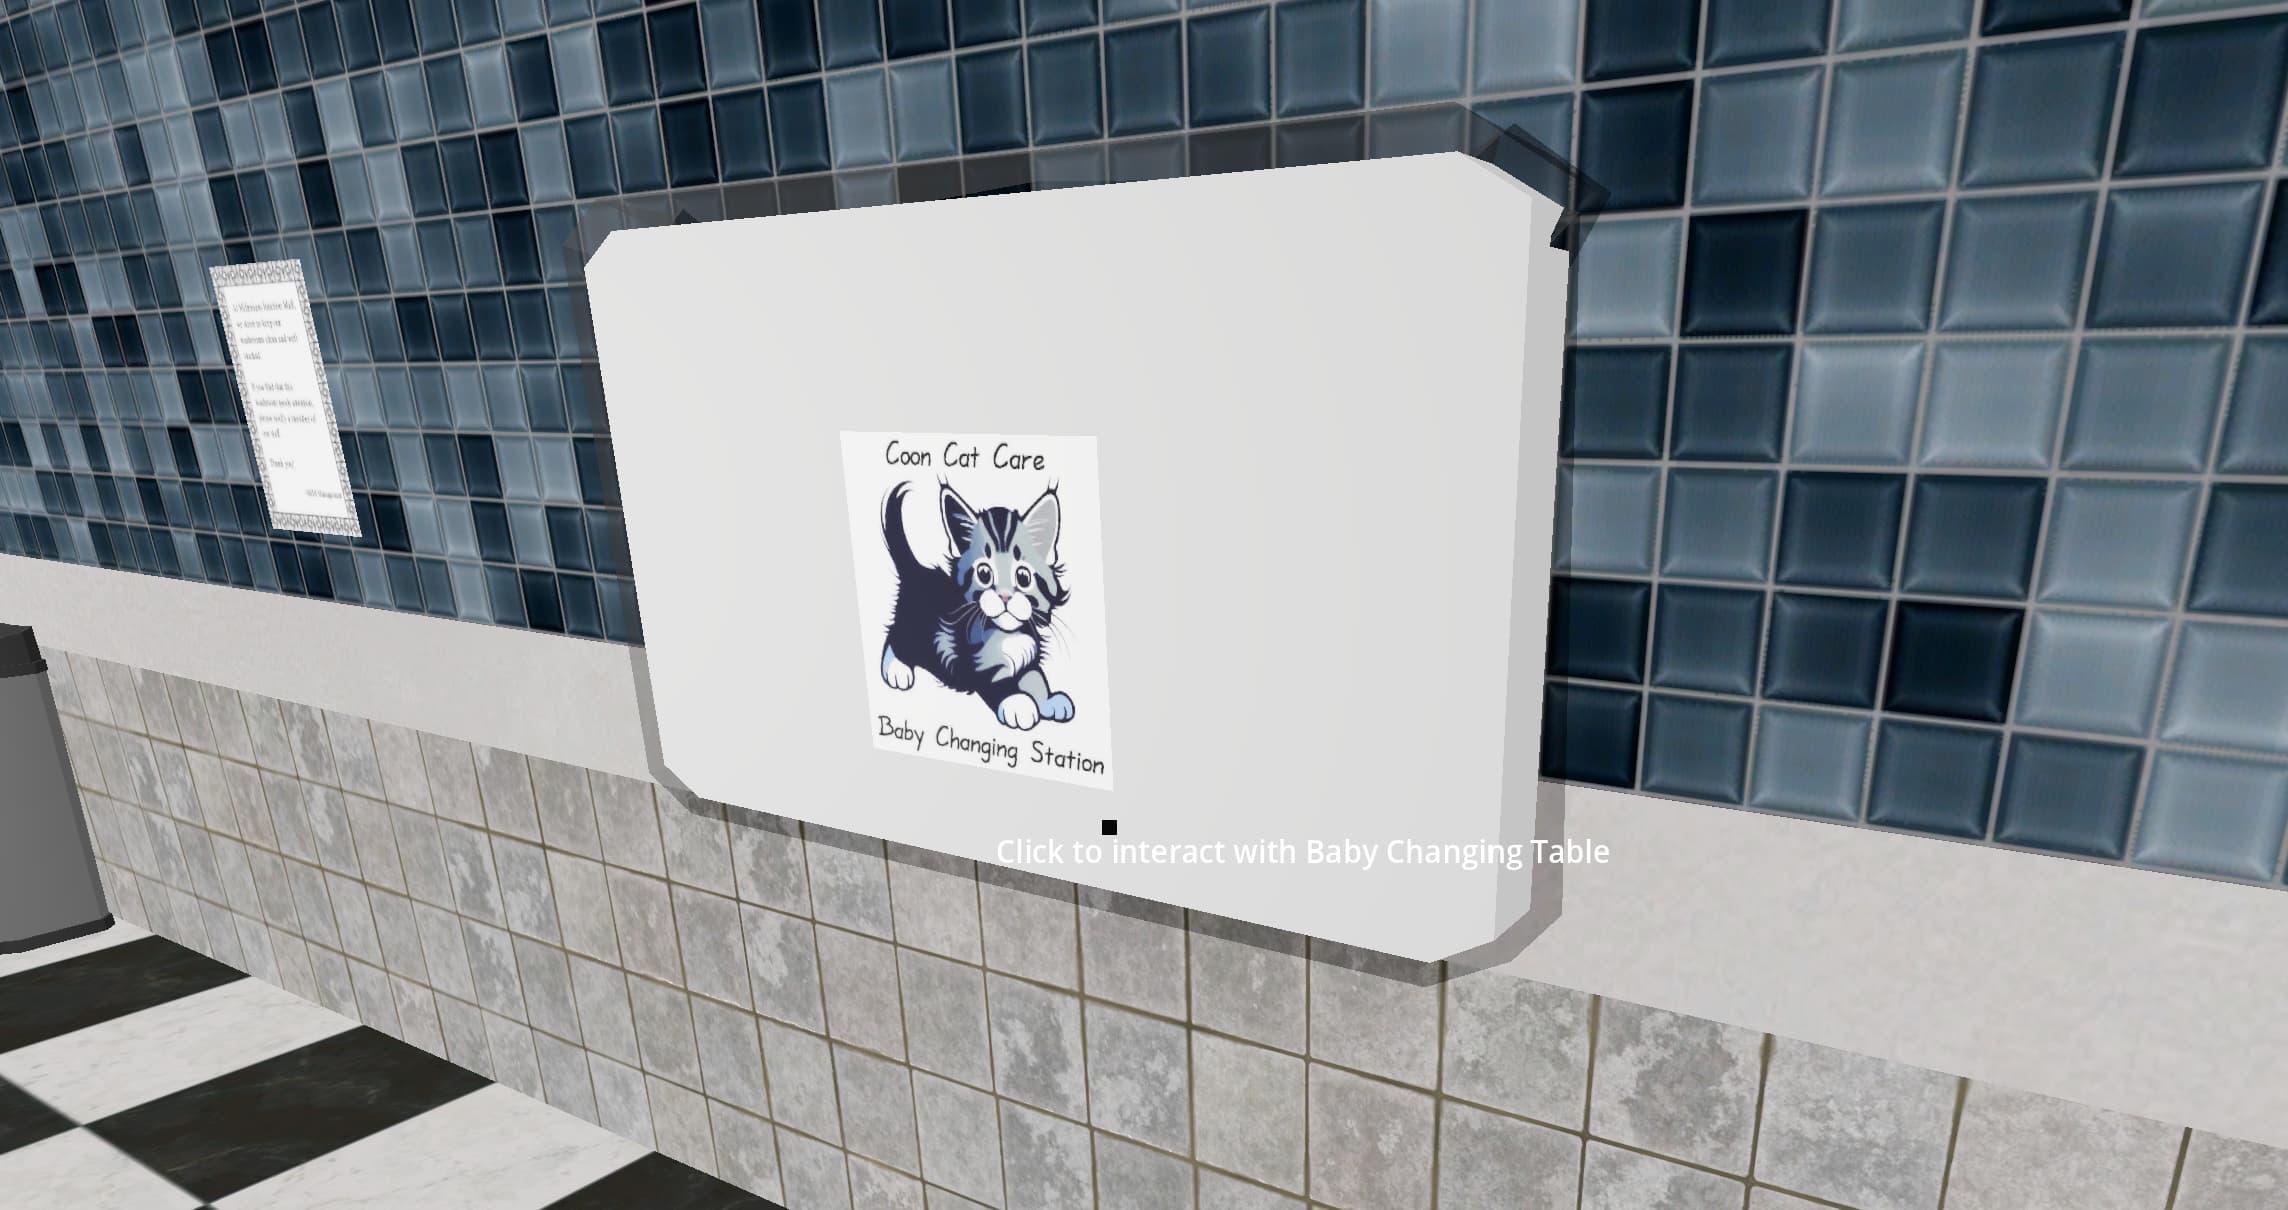 3D model of a grey fold-out baby changing table attached to the wall, with a picture of a cartoon coon cat as the fictional brand logo